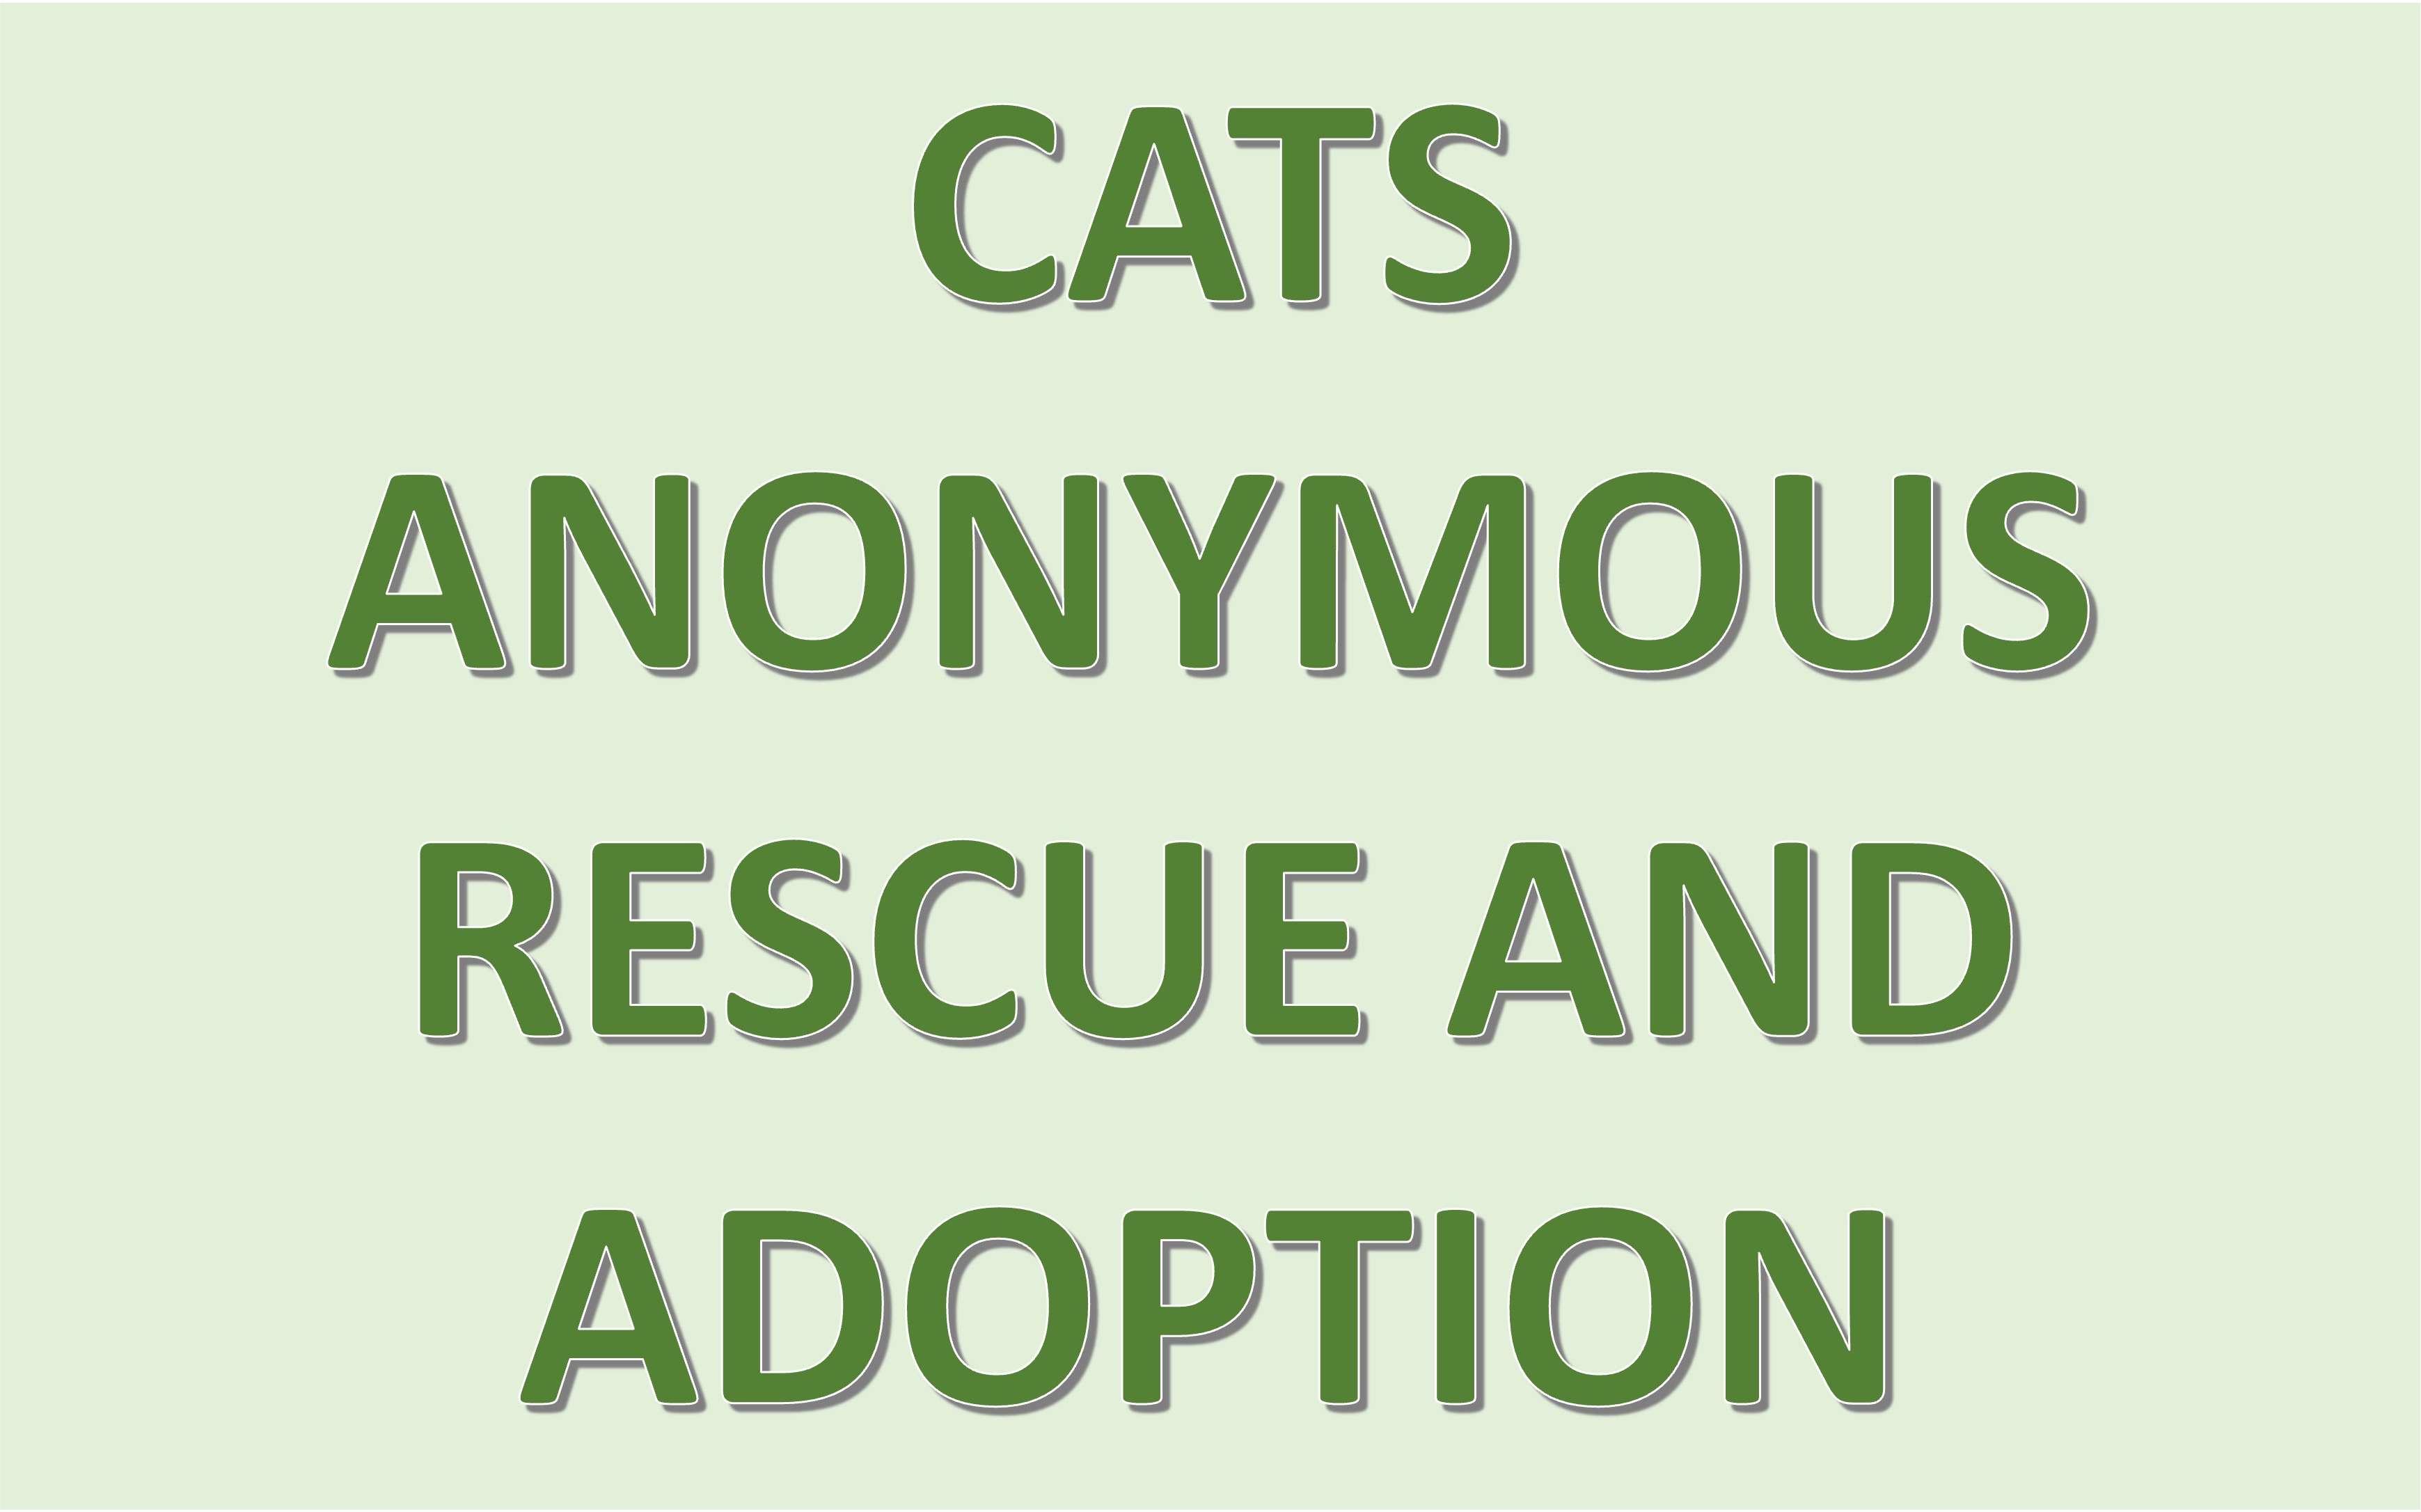 CATS ANONYMOUS RESCUE AND ADOPTION